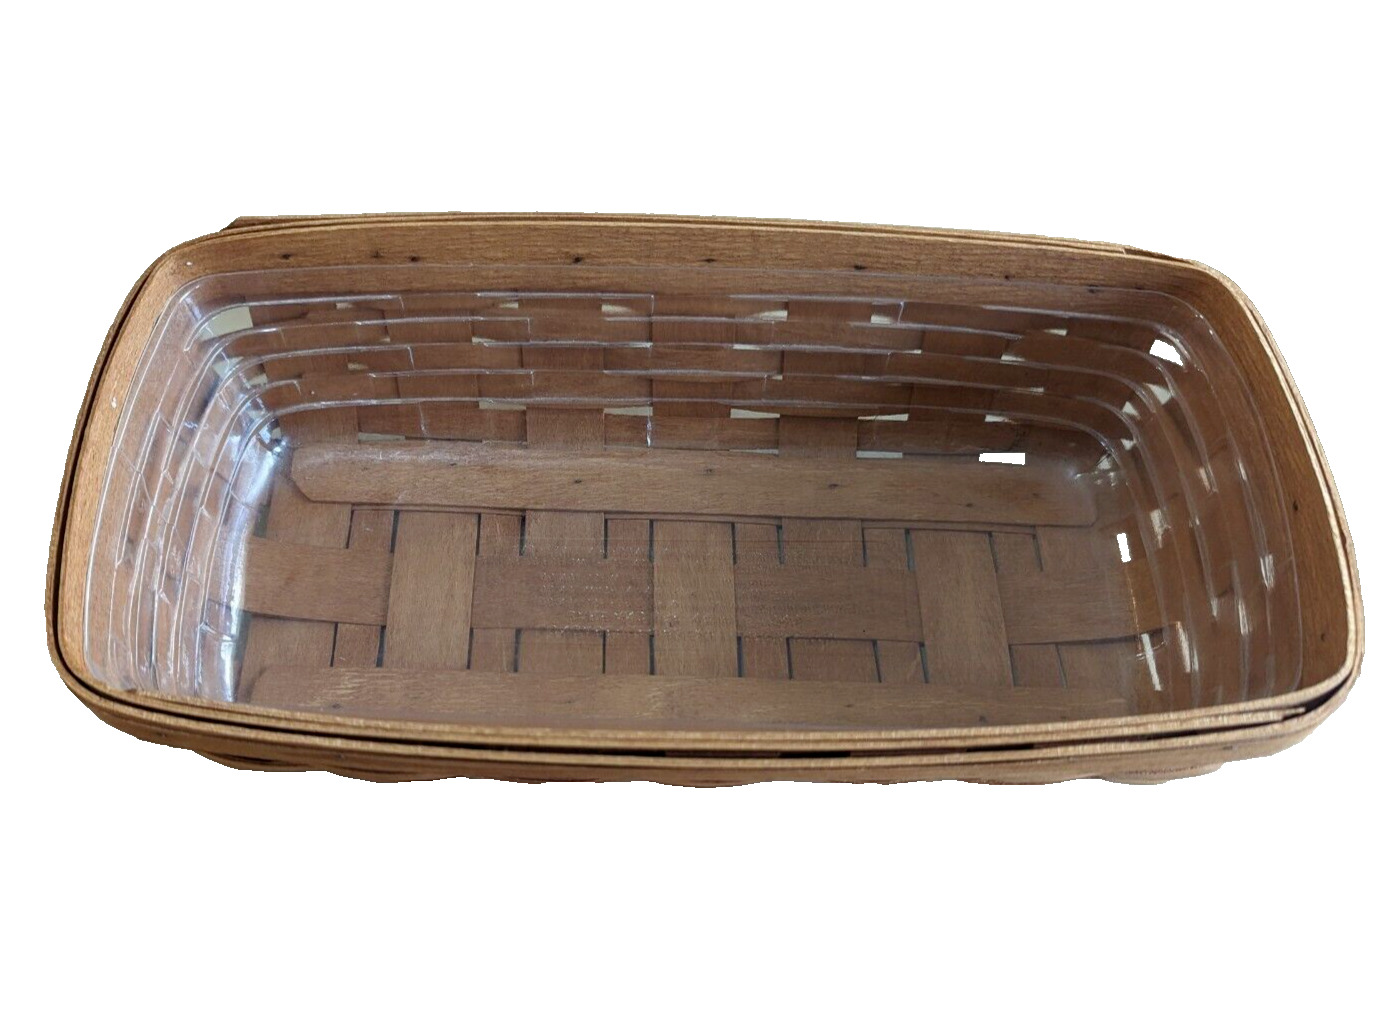 Longaberger Bread Baskets Handwoven Brown with Brick and Liner